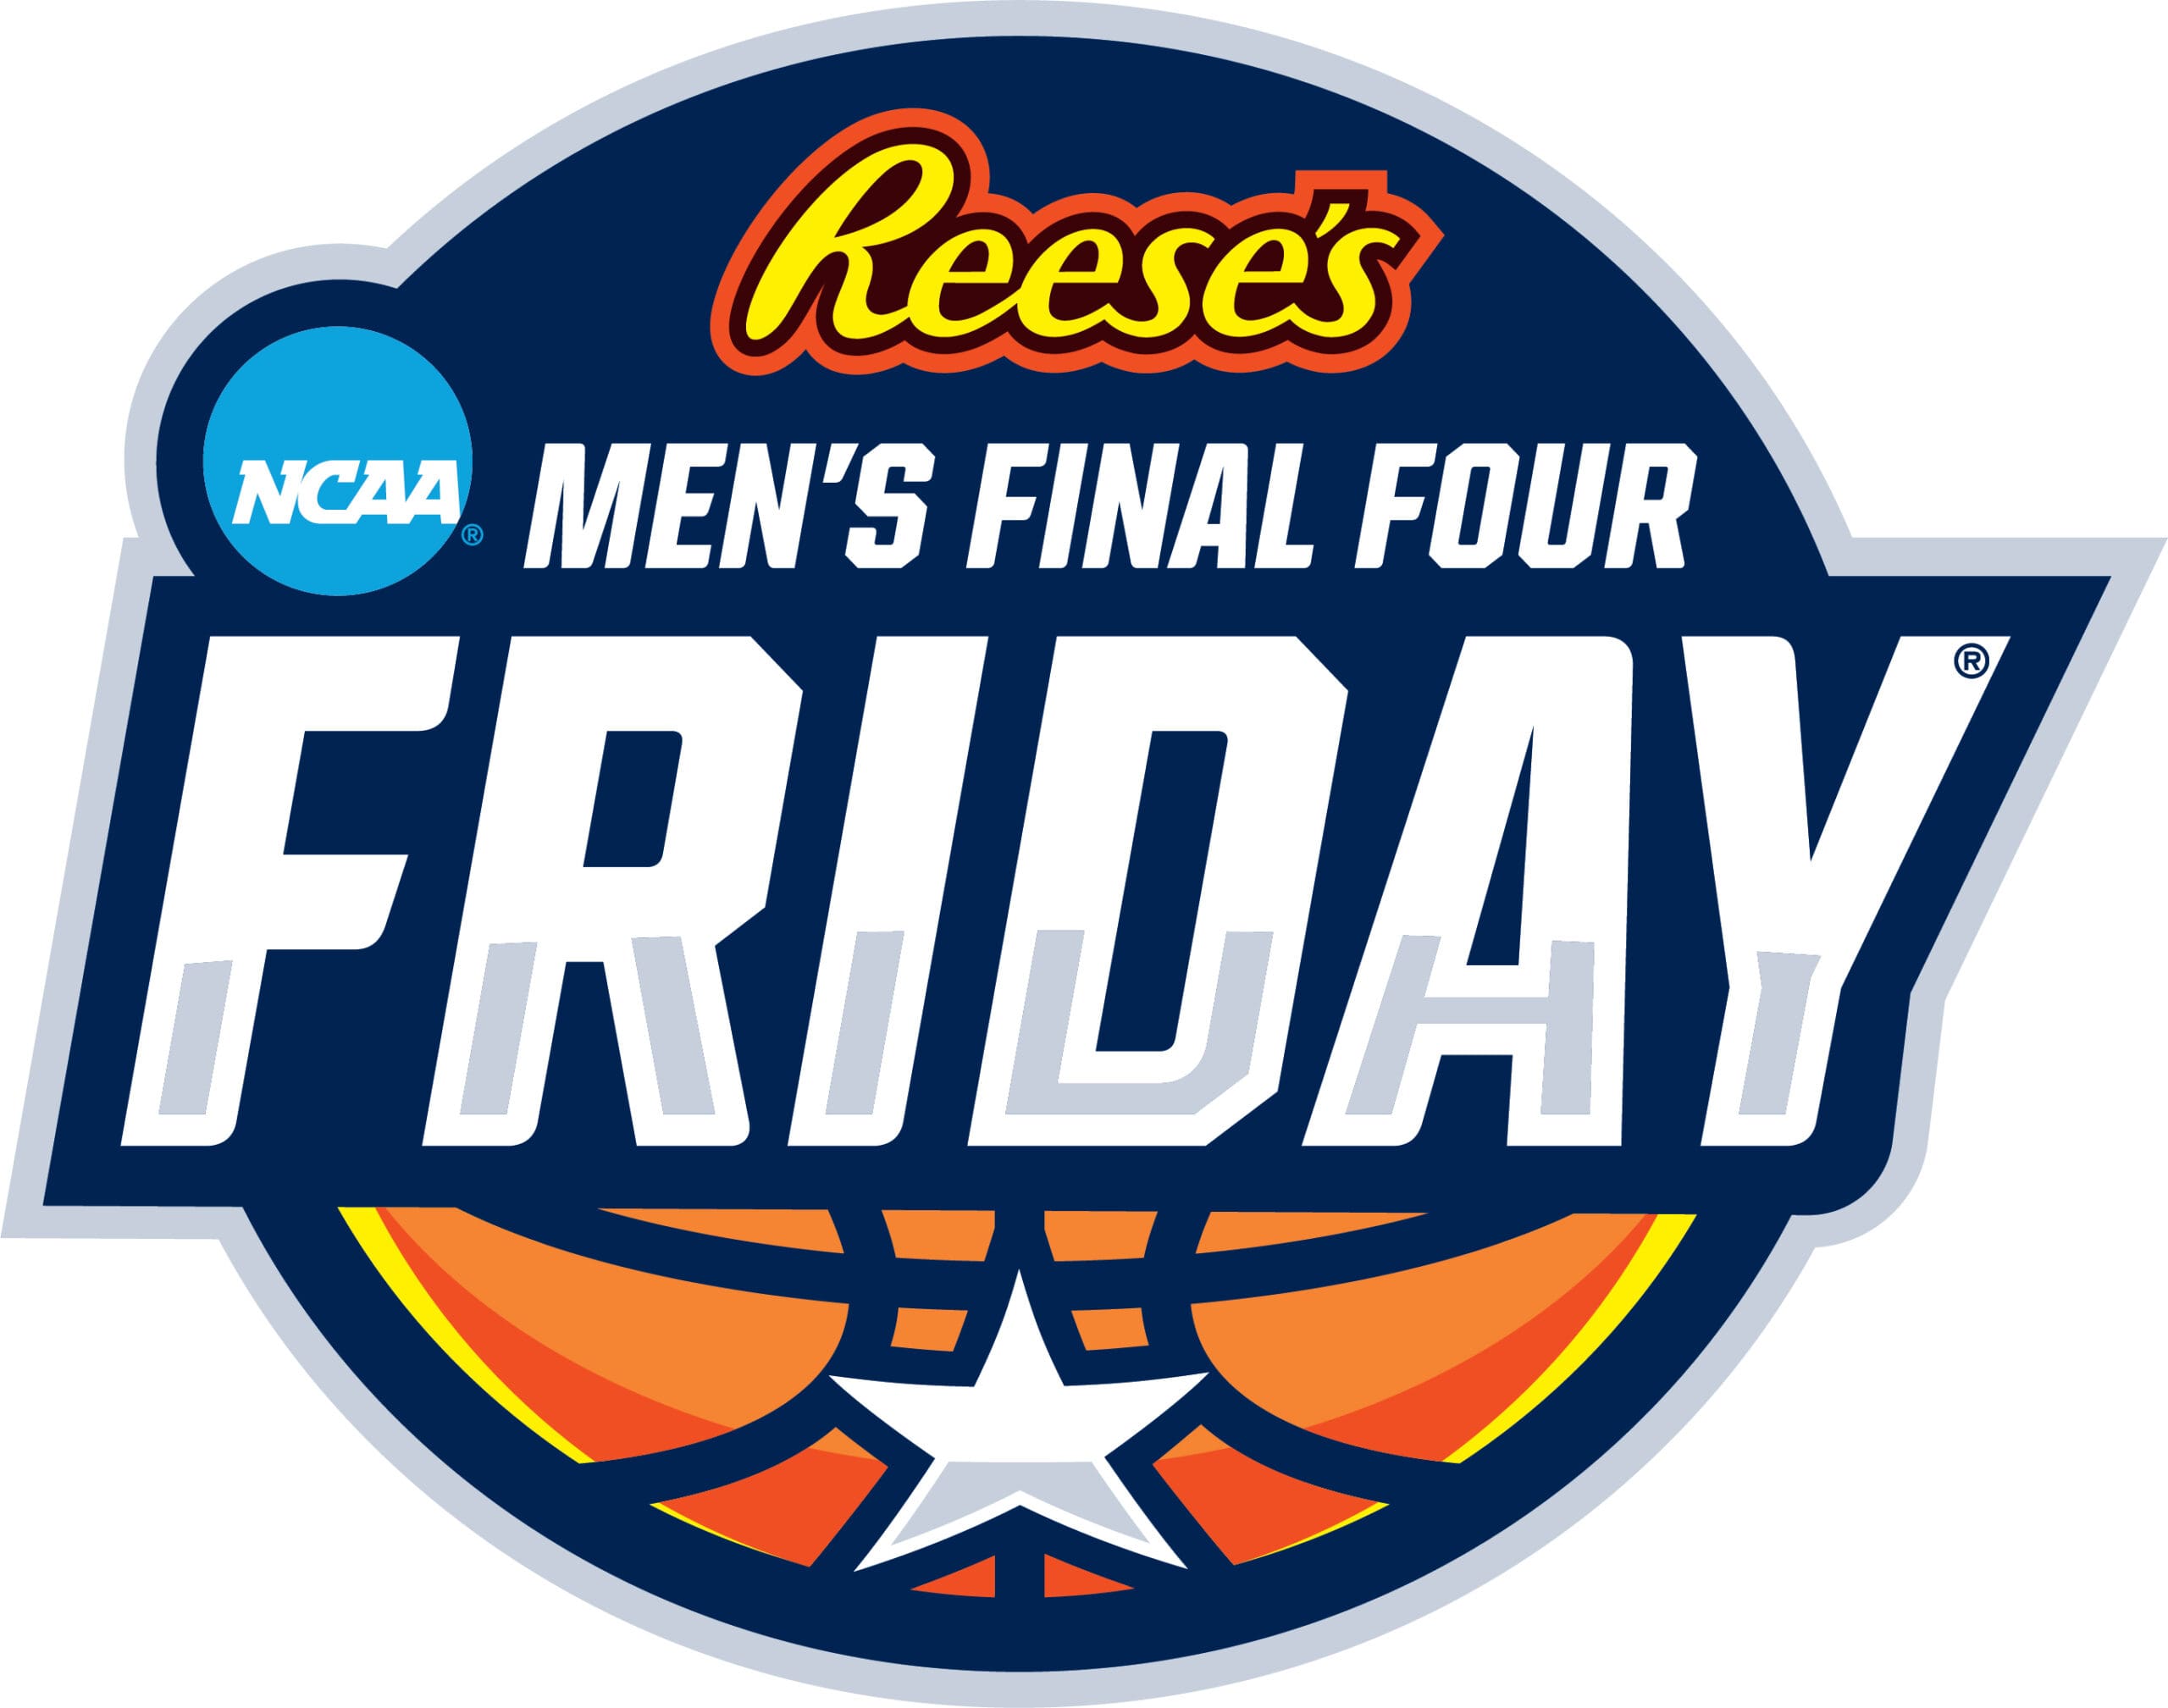 Reese's Men's Final Four Friday®